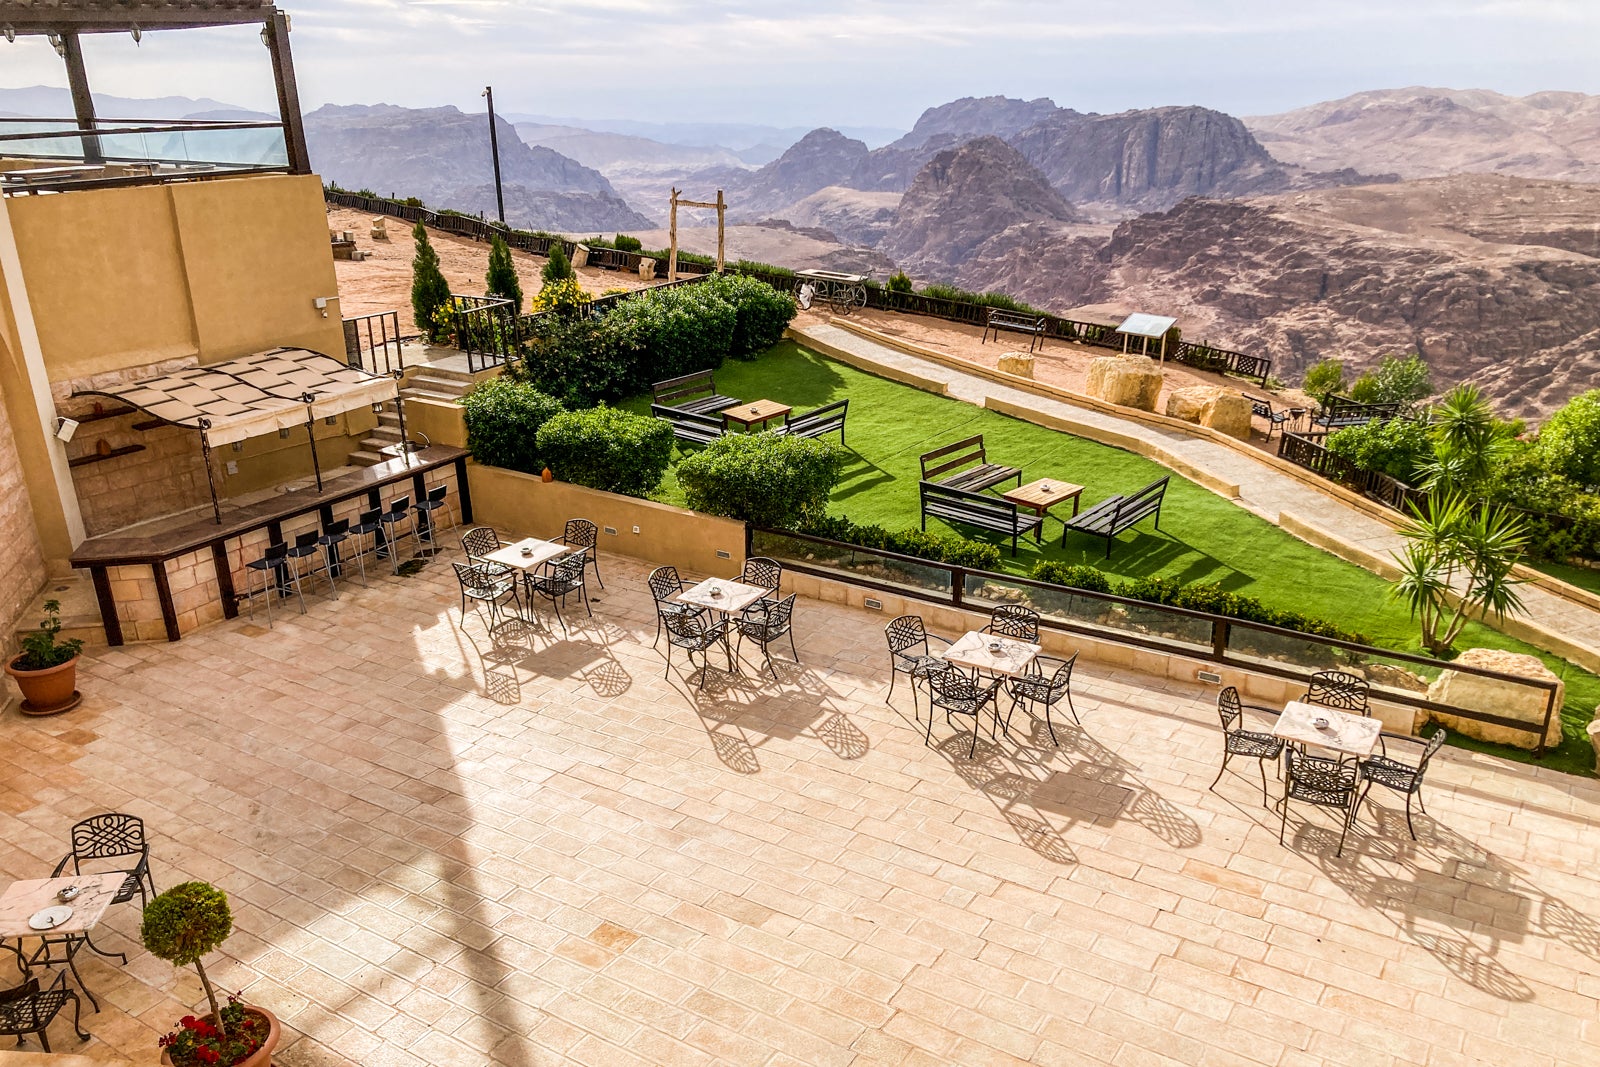 looking down at an outdoor area with dining and swimming pool at a hotel in the desert